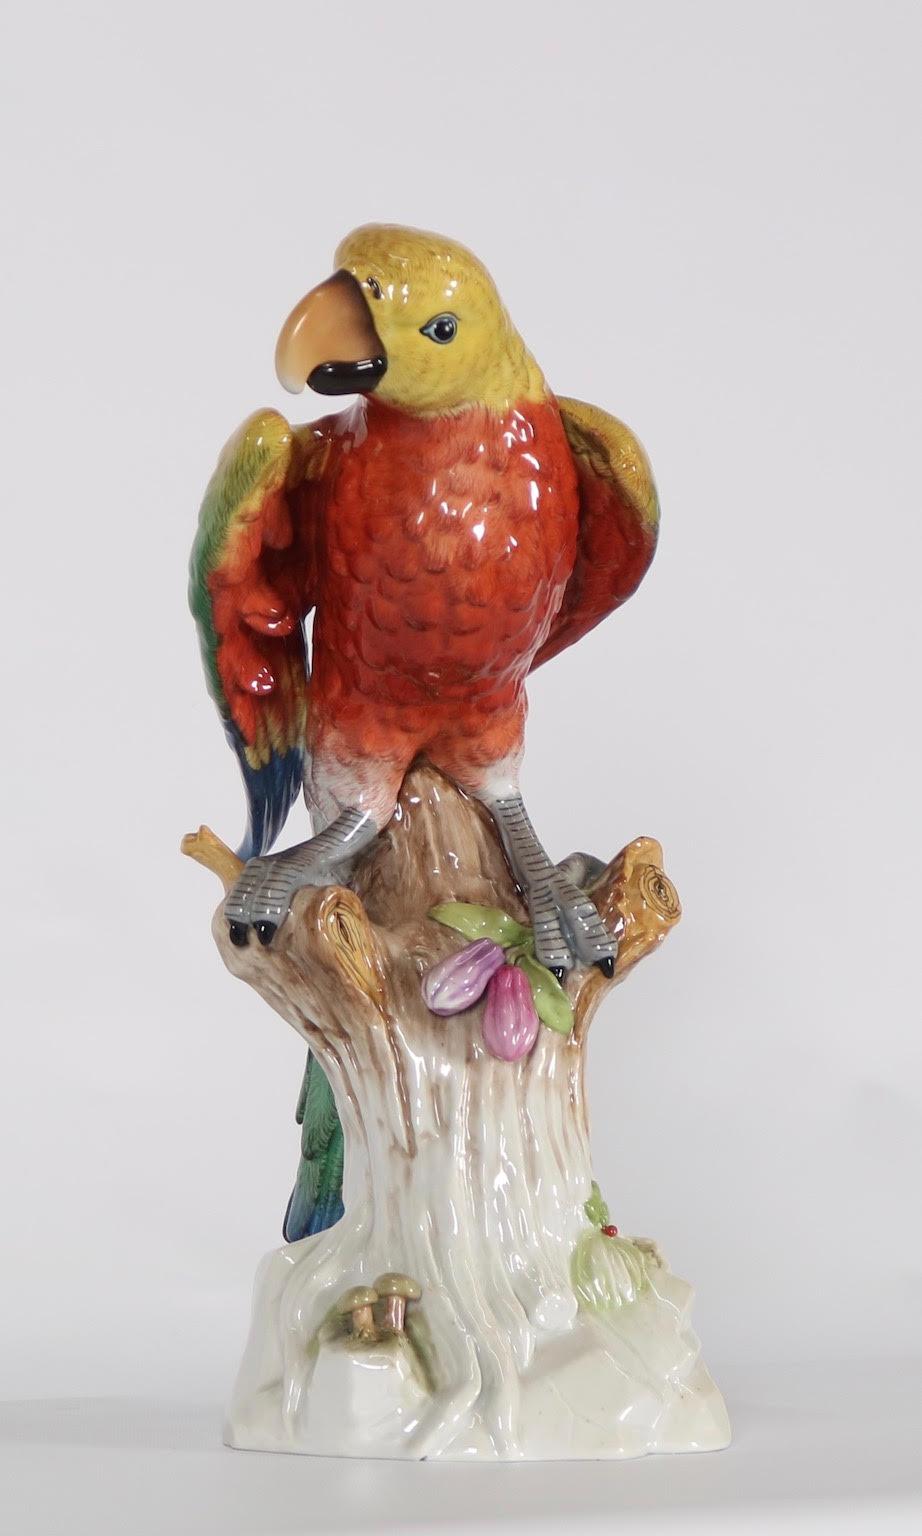 German Meissen style porcelain macaw parrot figurine sitting atop a fruit bearing tree stump. The style of this piece is strongly influenced by Kaendler’s animal figurines from the 18th century which were made for Meissen. The piece was hand-made in